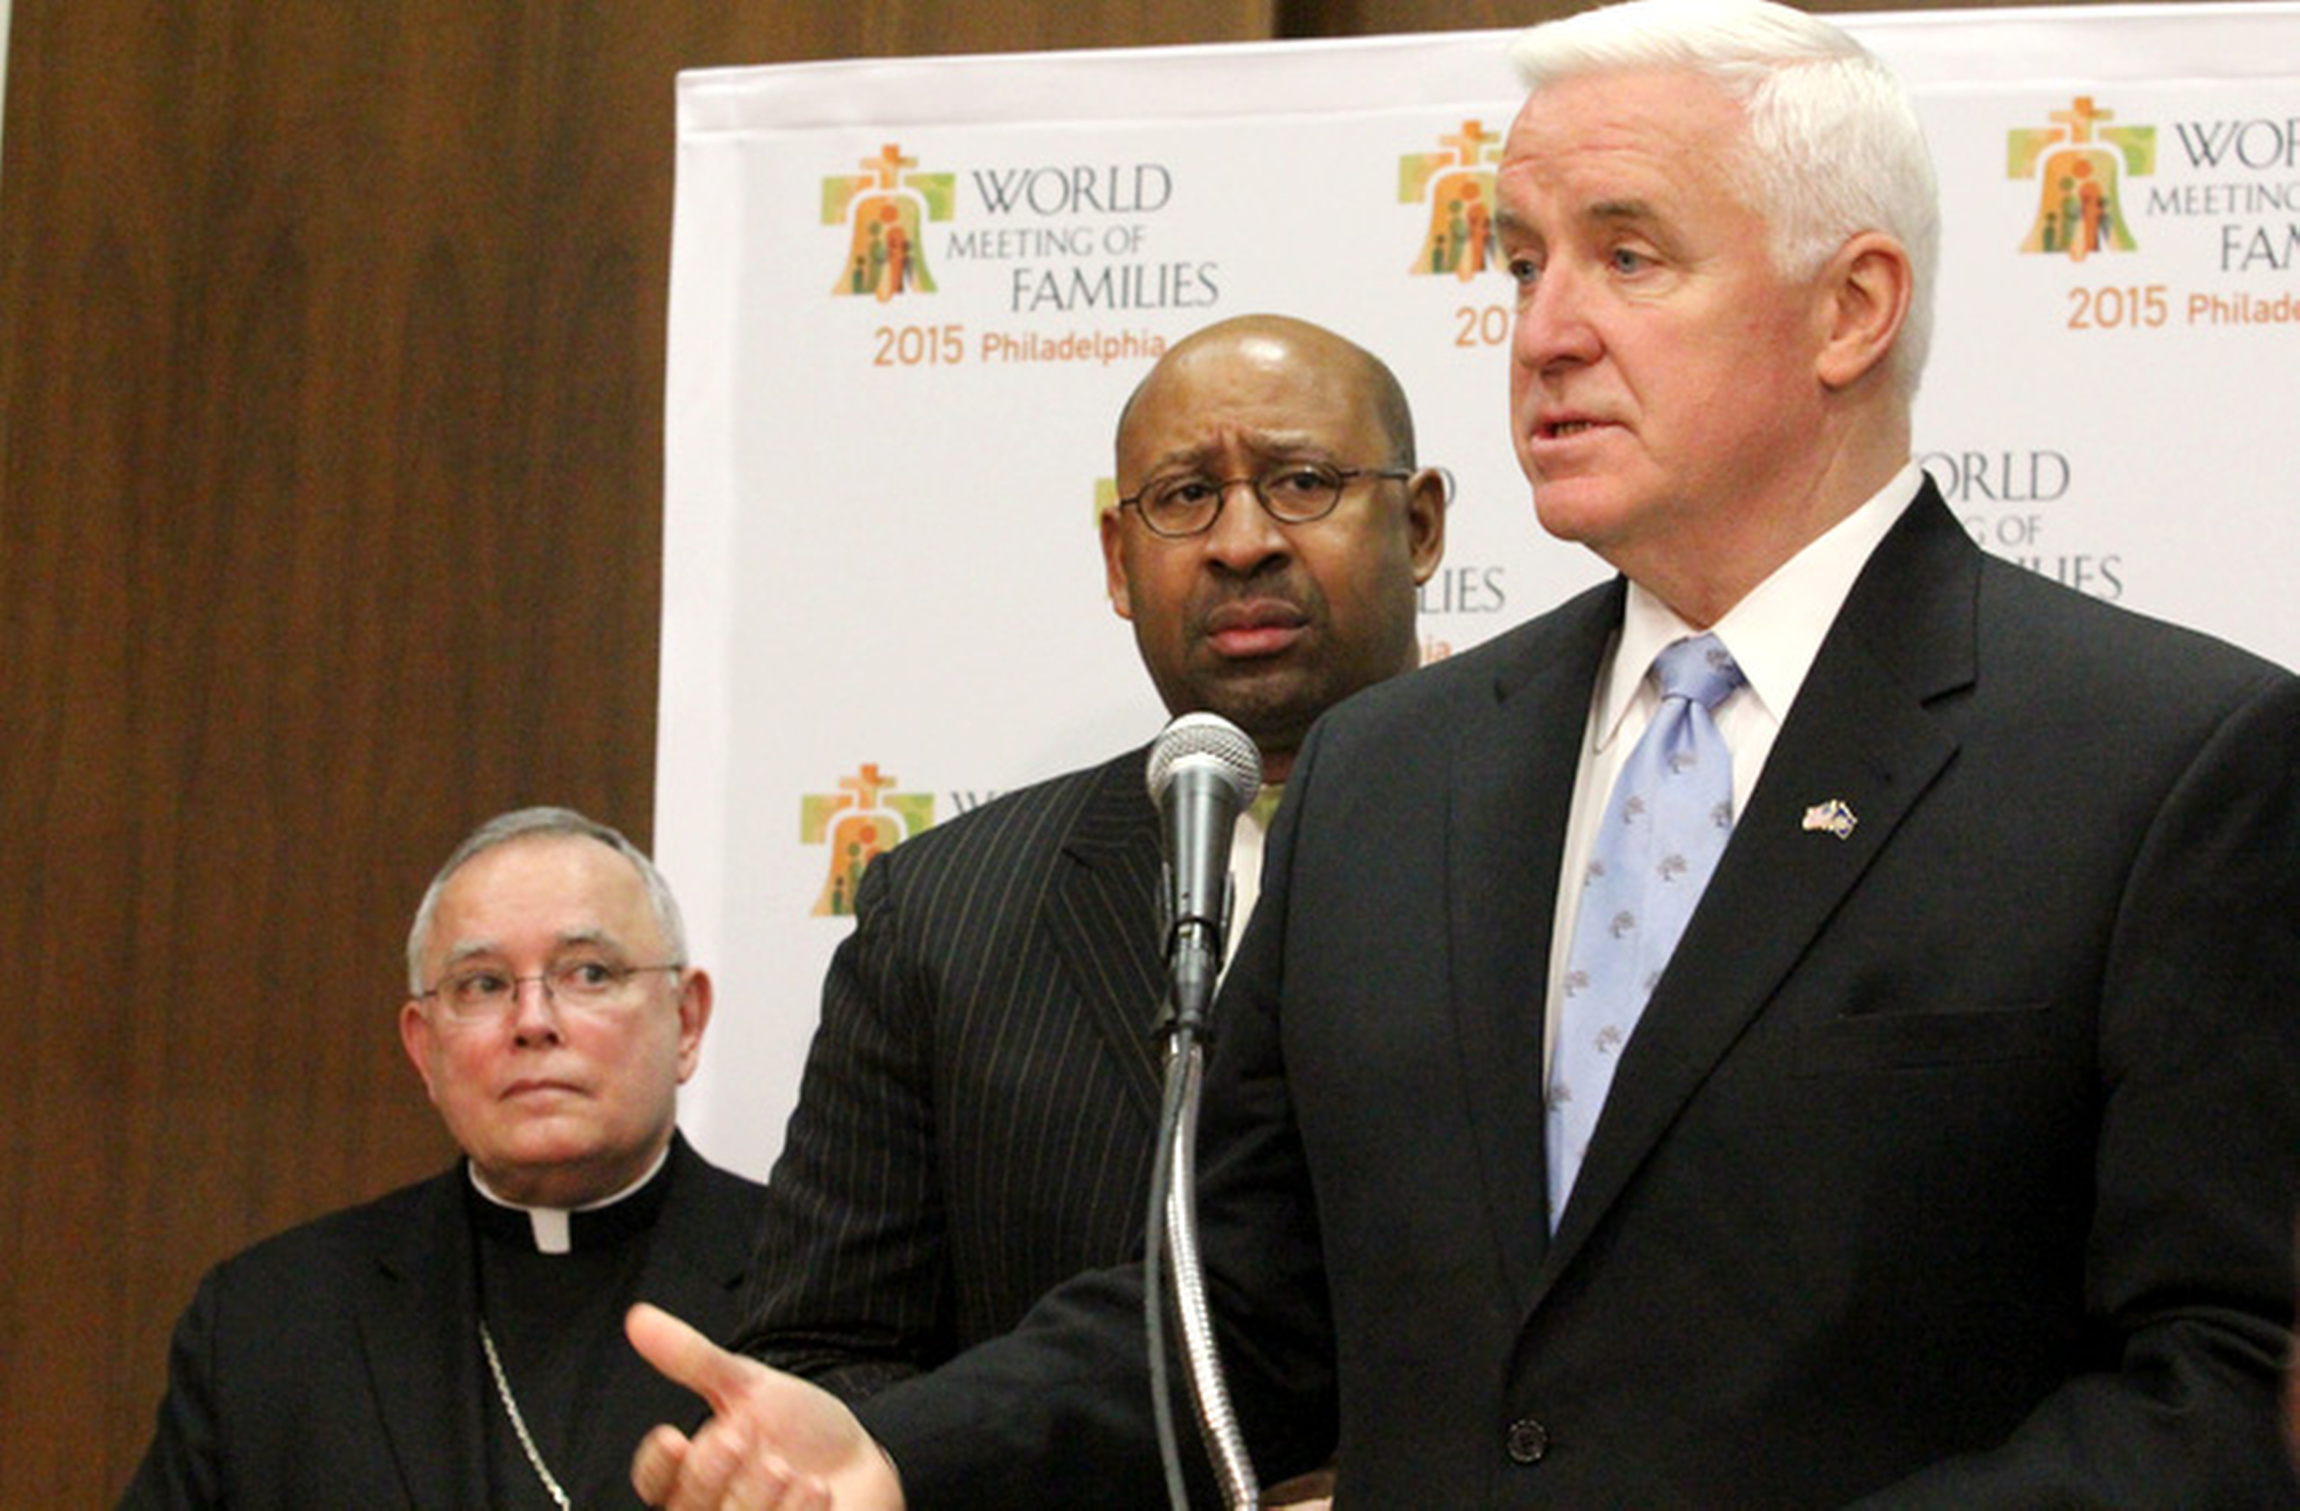 Archbishop Charles J. Chaput of Philadelphia and Philadelphia Mayor Michael Nutter look on as Pennsylvania Gov. Tom Corbett address the media during a March 7 news conference in Philadelphia. Nutter was announcing that they are leading a delegation to th e Vatican later in the month to meet with officials about plans for the World Meeting of Families in 2015, taking place in Phialdelphia. (CNS photo/Sarah Webb, CatholicPhilly.com) (March 7, 2014)